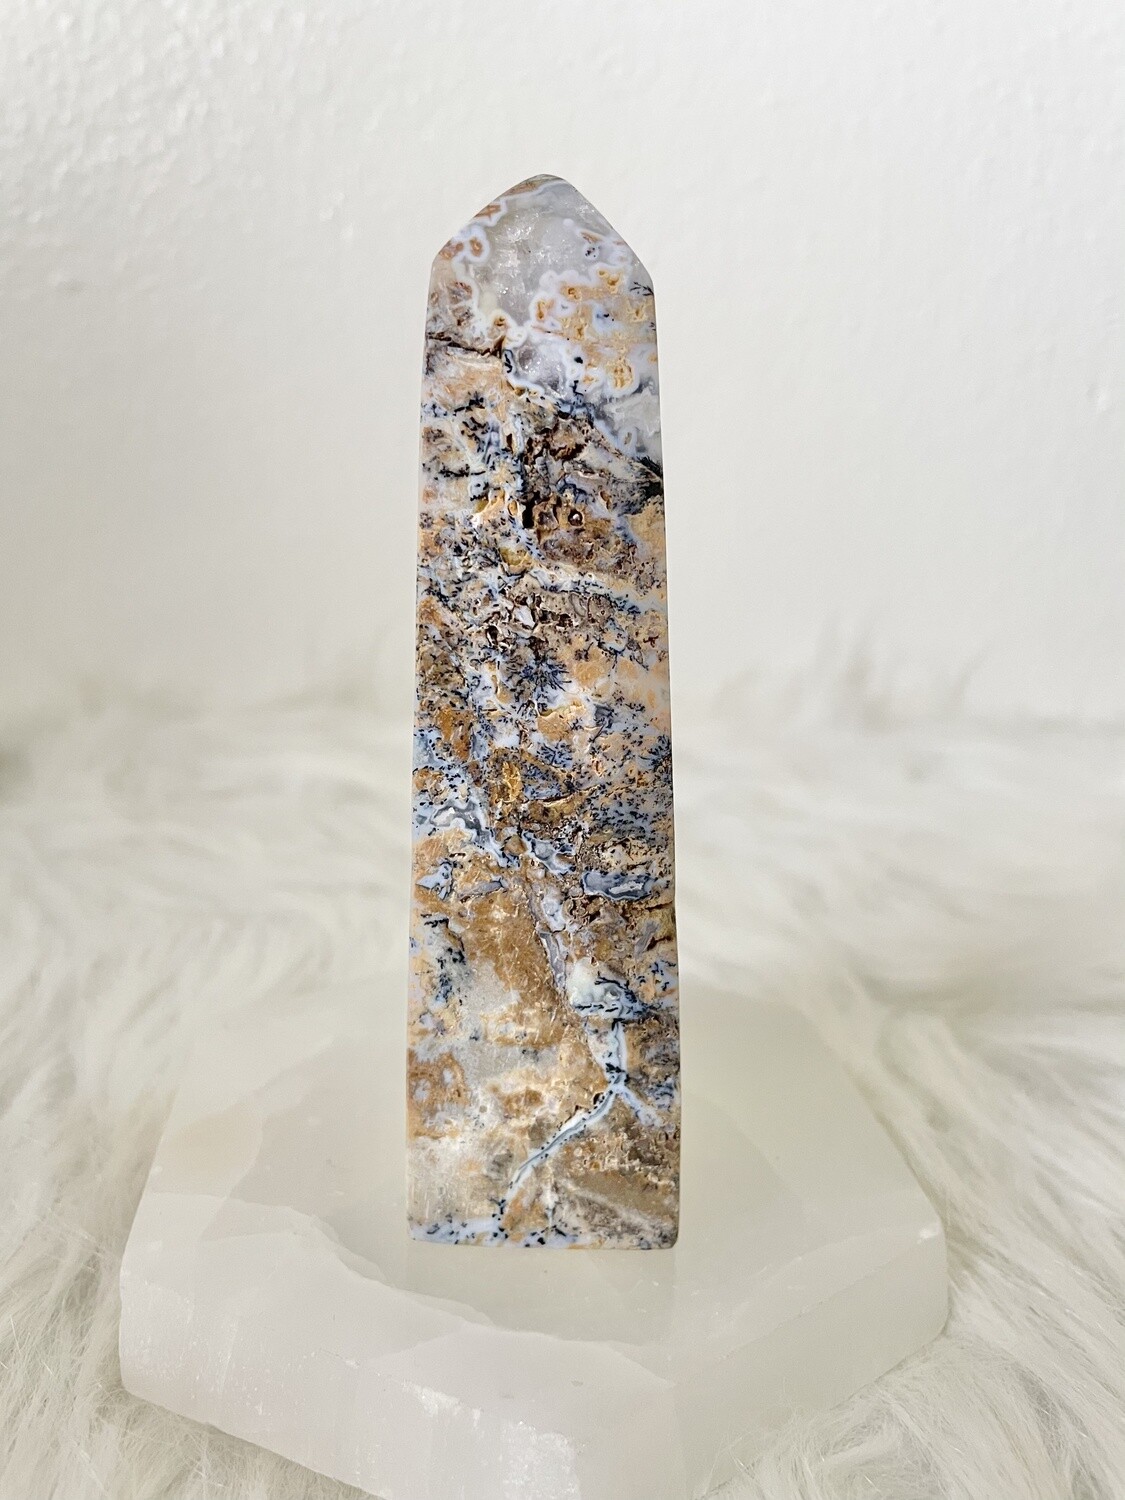 Pamber Forest Blue Dendritic Agate Tower with Druzy